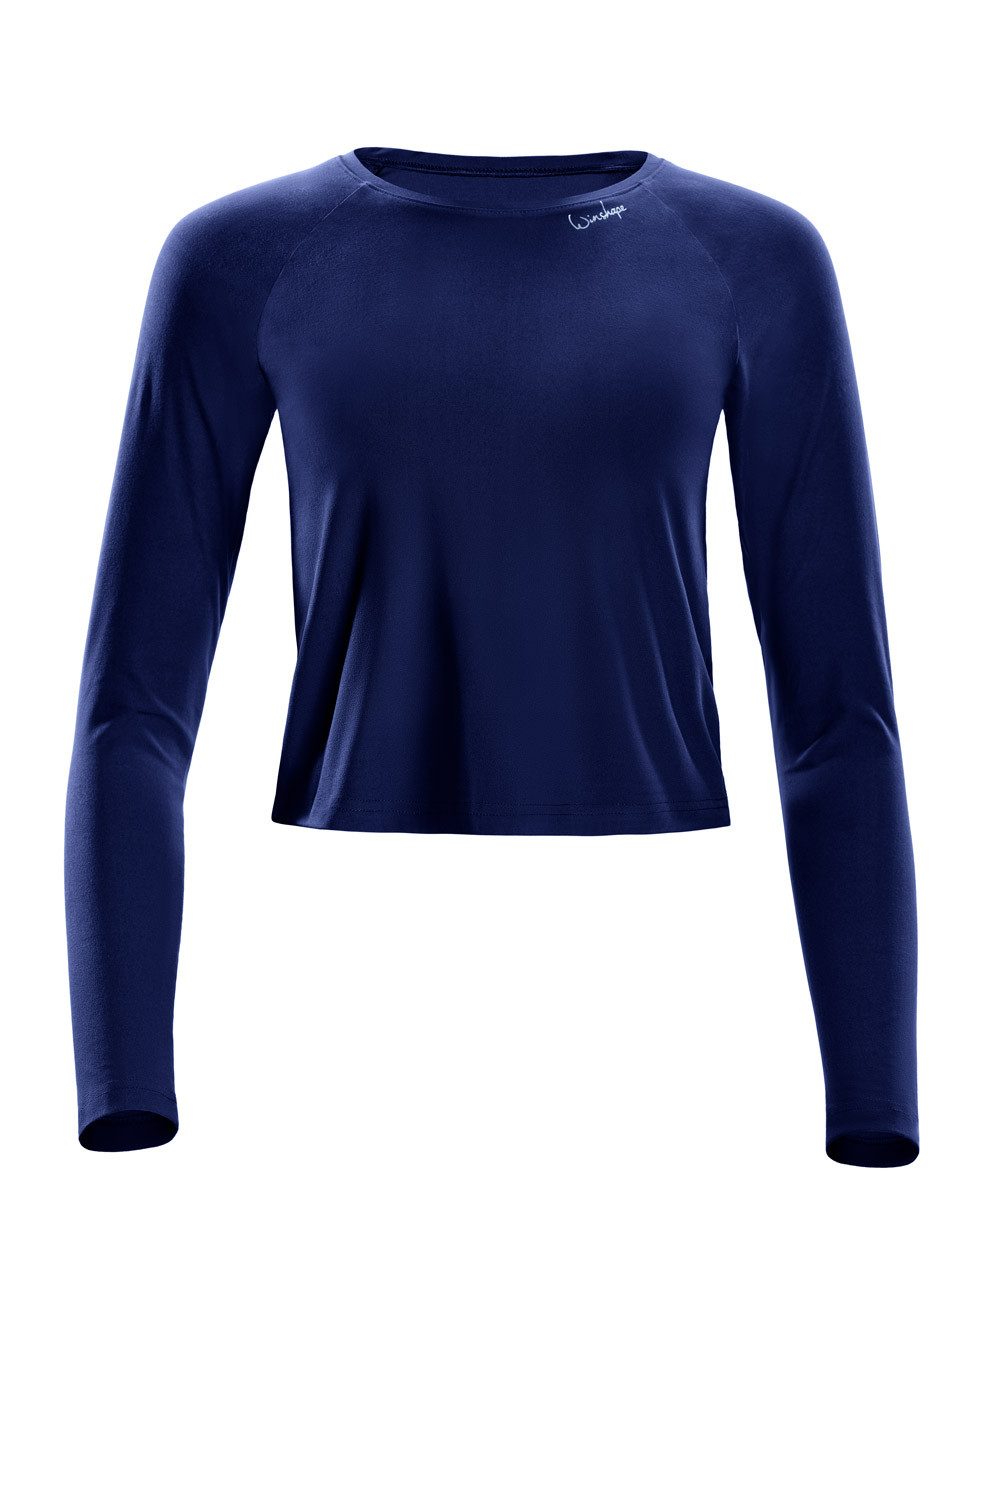 AET119LS, Light Style Soft dark Long Ultra Top Soft Functional Sleeve blue, and Winshape Cropped